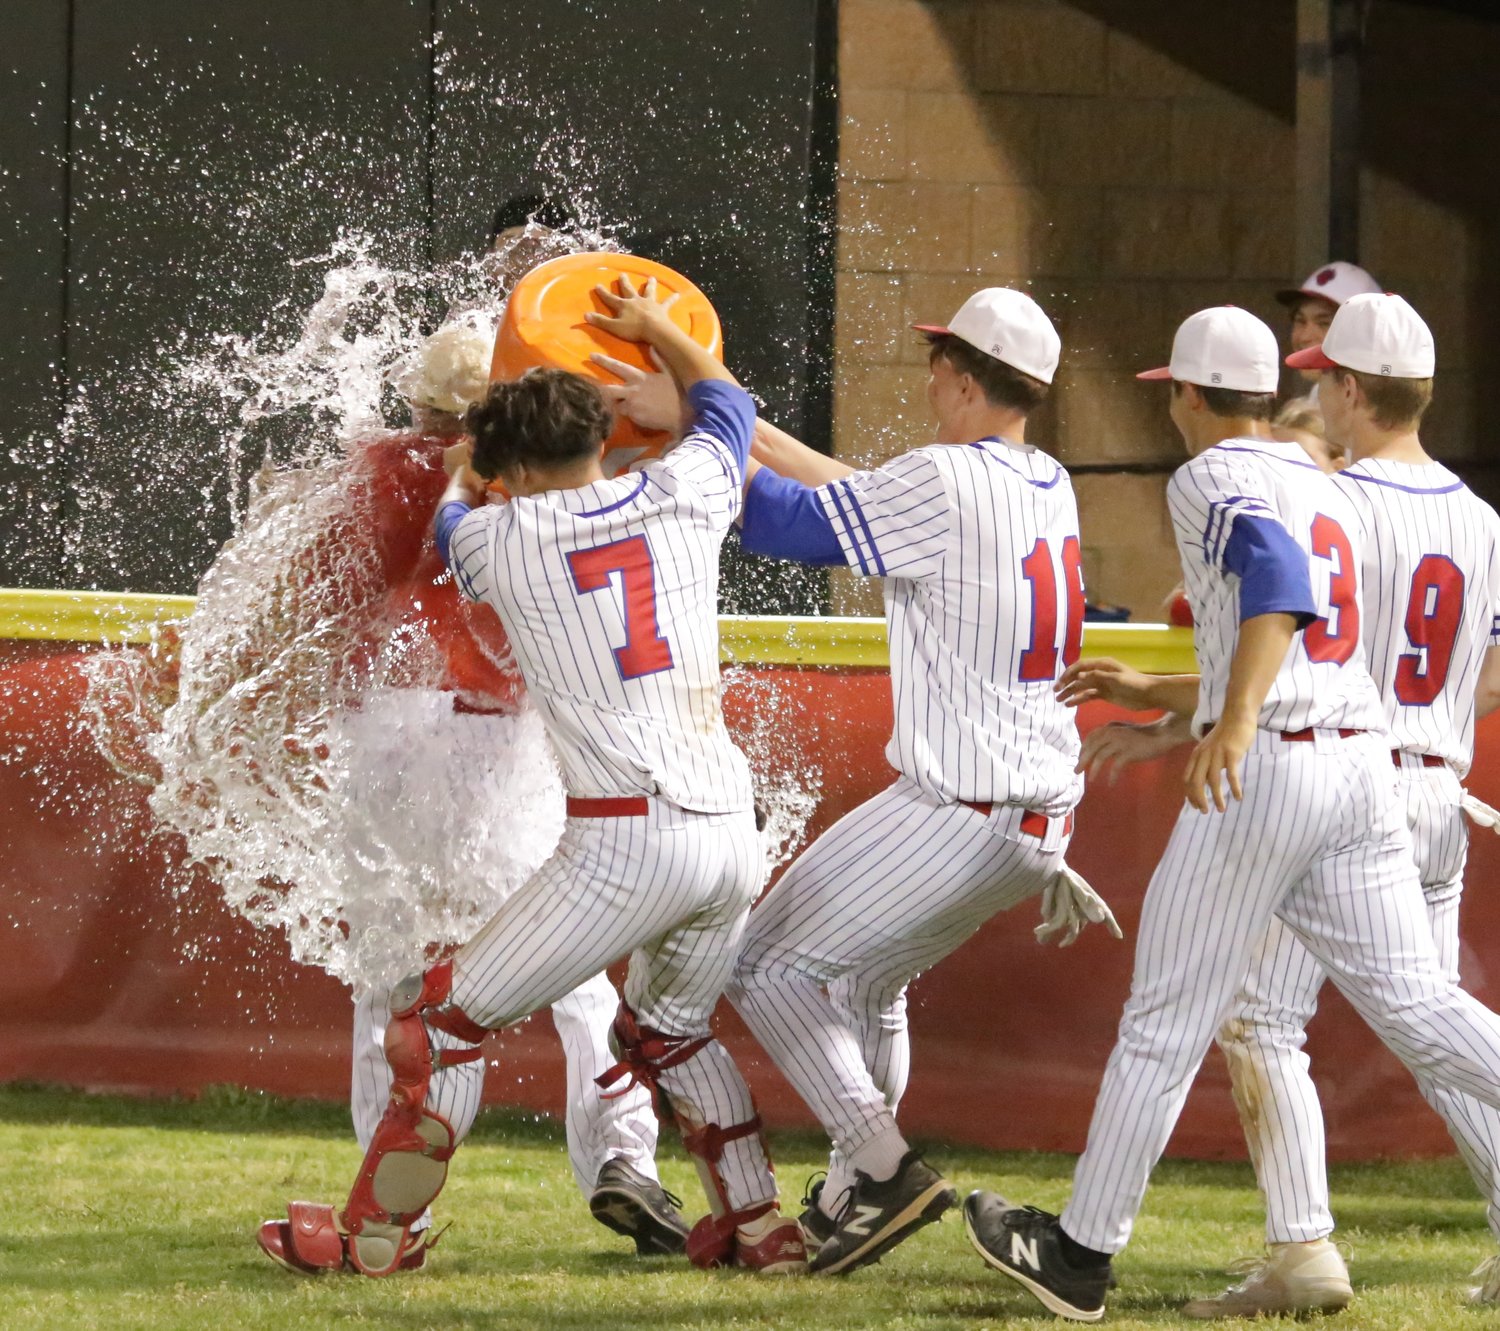 Alba-Golden baseball Coach Jimmy Oxford disappeared in a wall of Gatorade in the post-game celebration as the Panthers won their first district championship Friday.